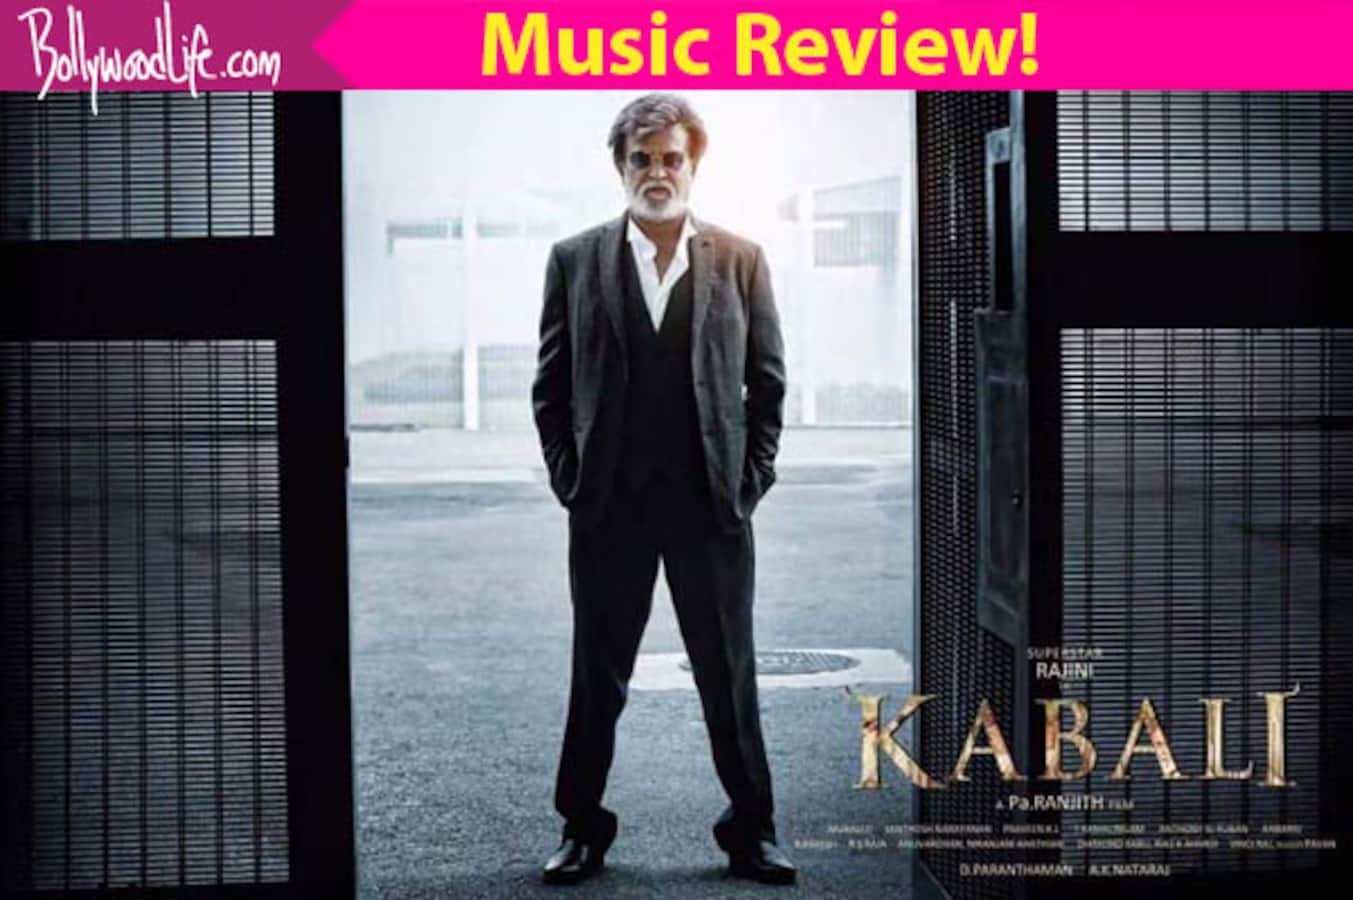 Kabali music review: Santosh Narayan delivers the BIGGEST musical hit for Rajinikanth in the last decade!